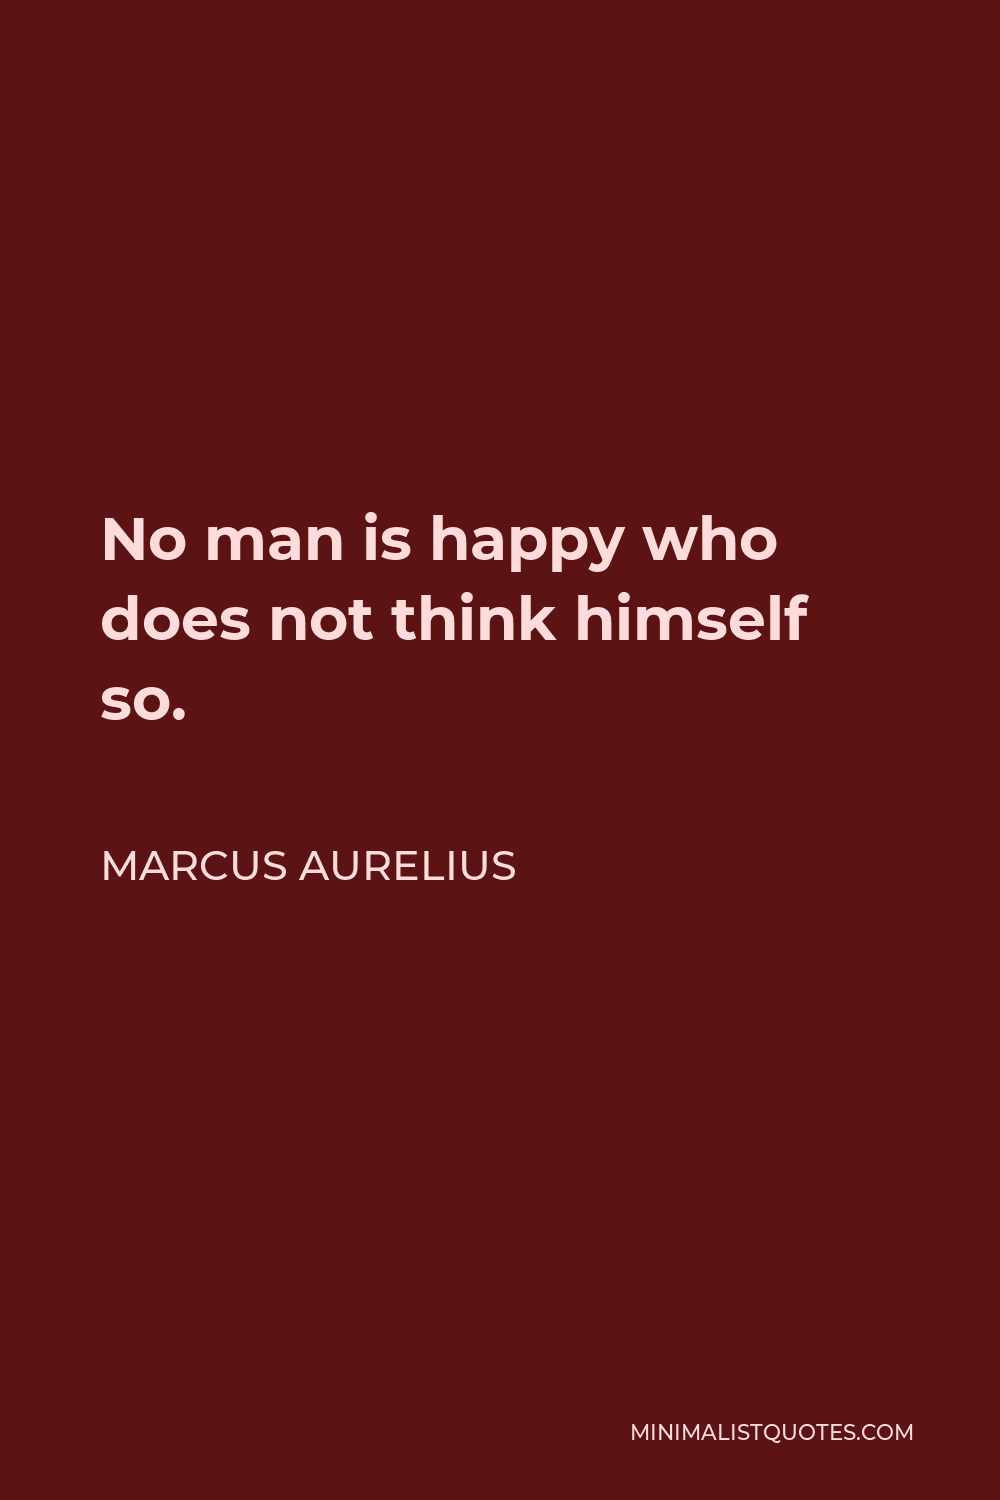 Marcus Aurelius Quote - No man is happy who does not think himself so.